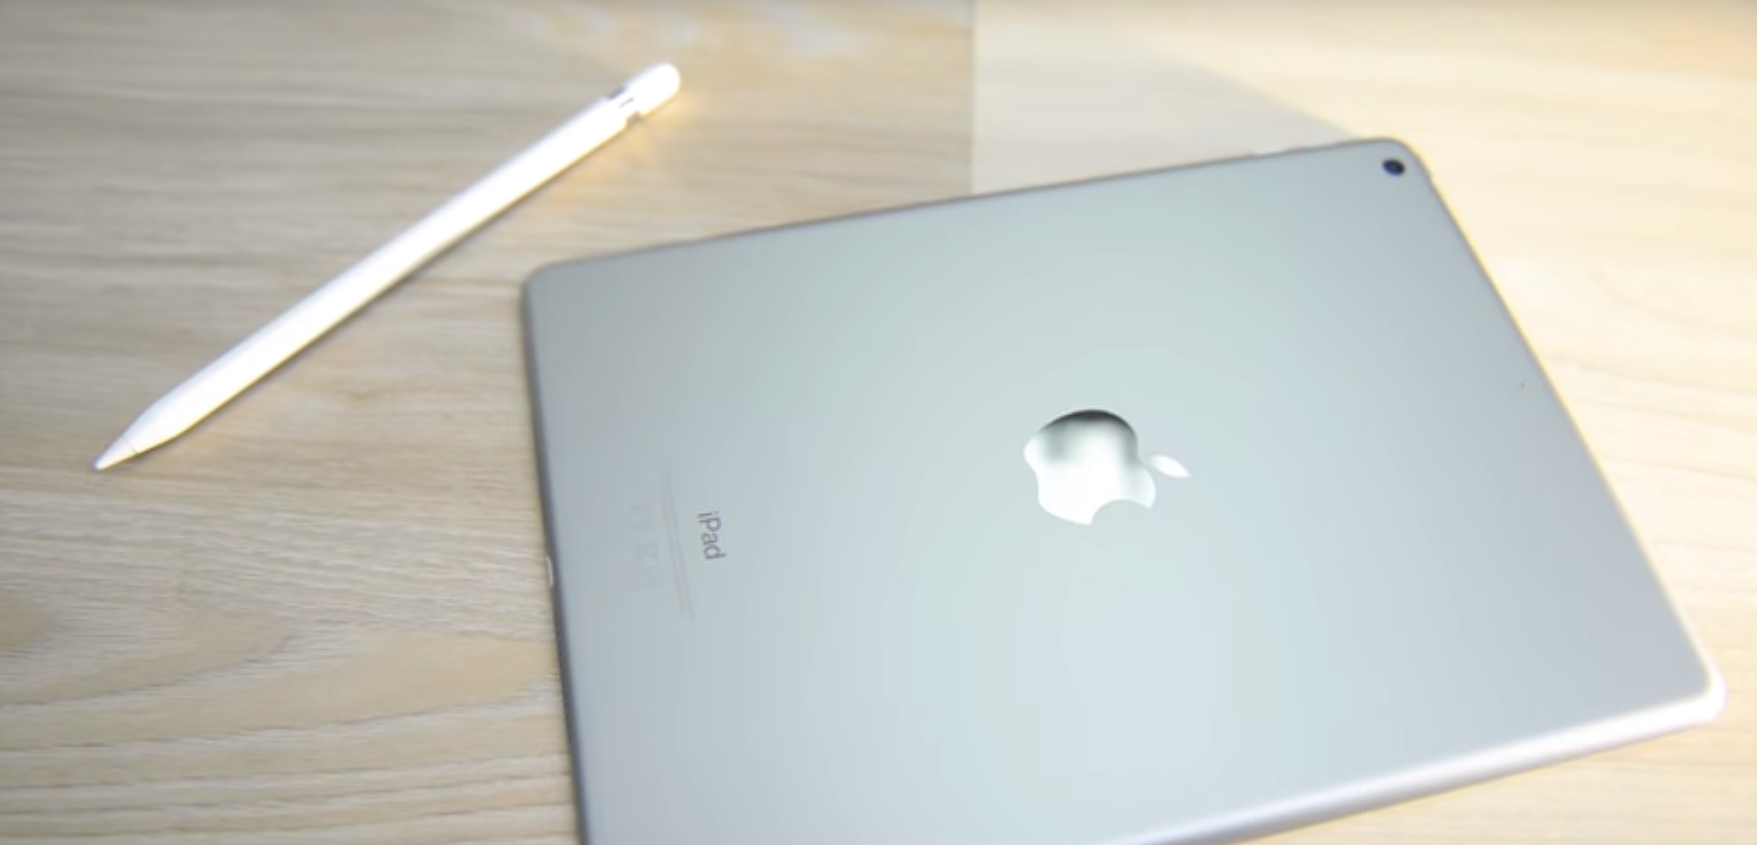 Review of the Apple iPad 10.2 tablet